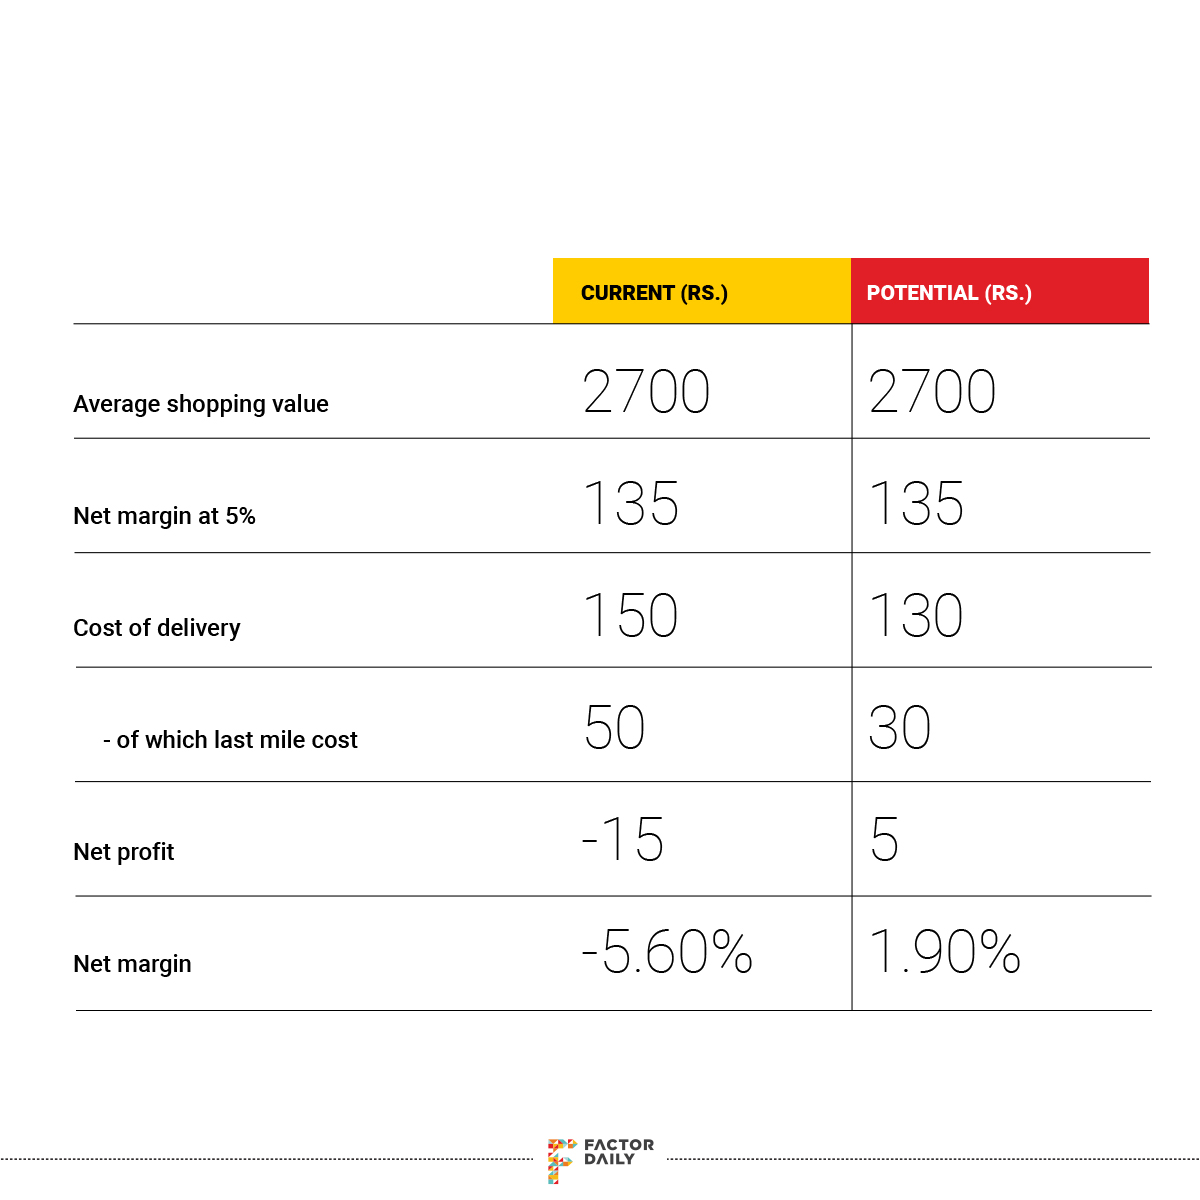 Table 2: Illustration: An improvement in the last mile cost can swing the profitability of an e-commerce business